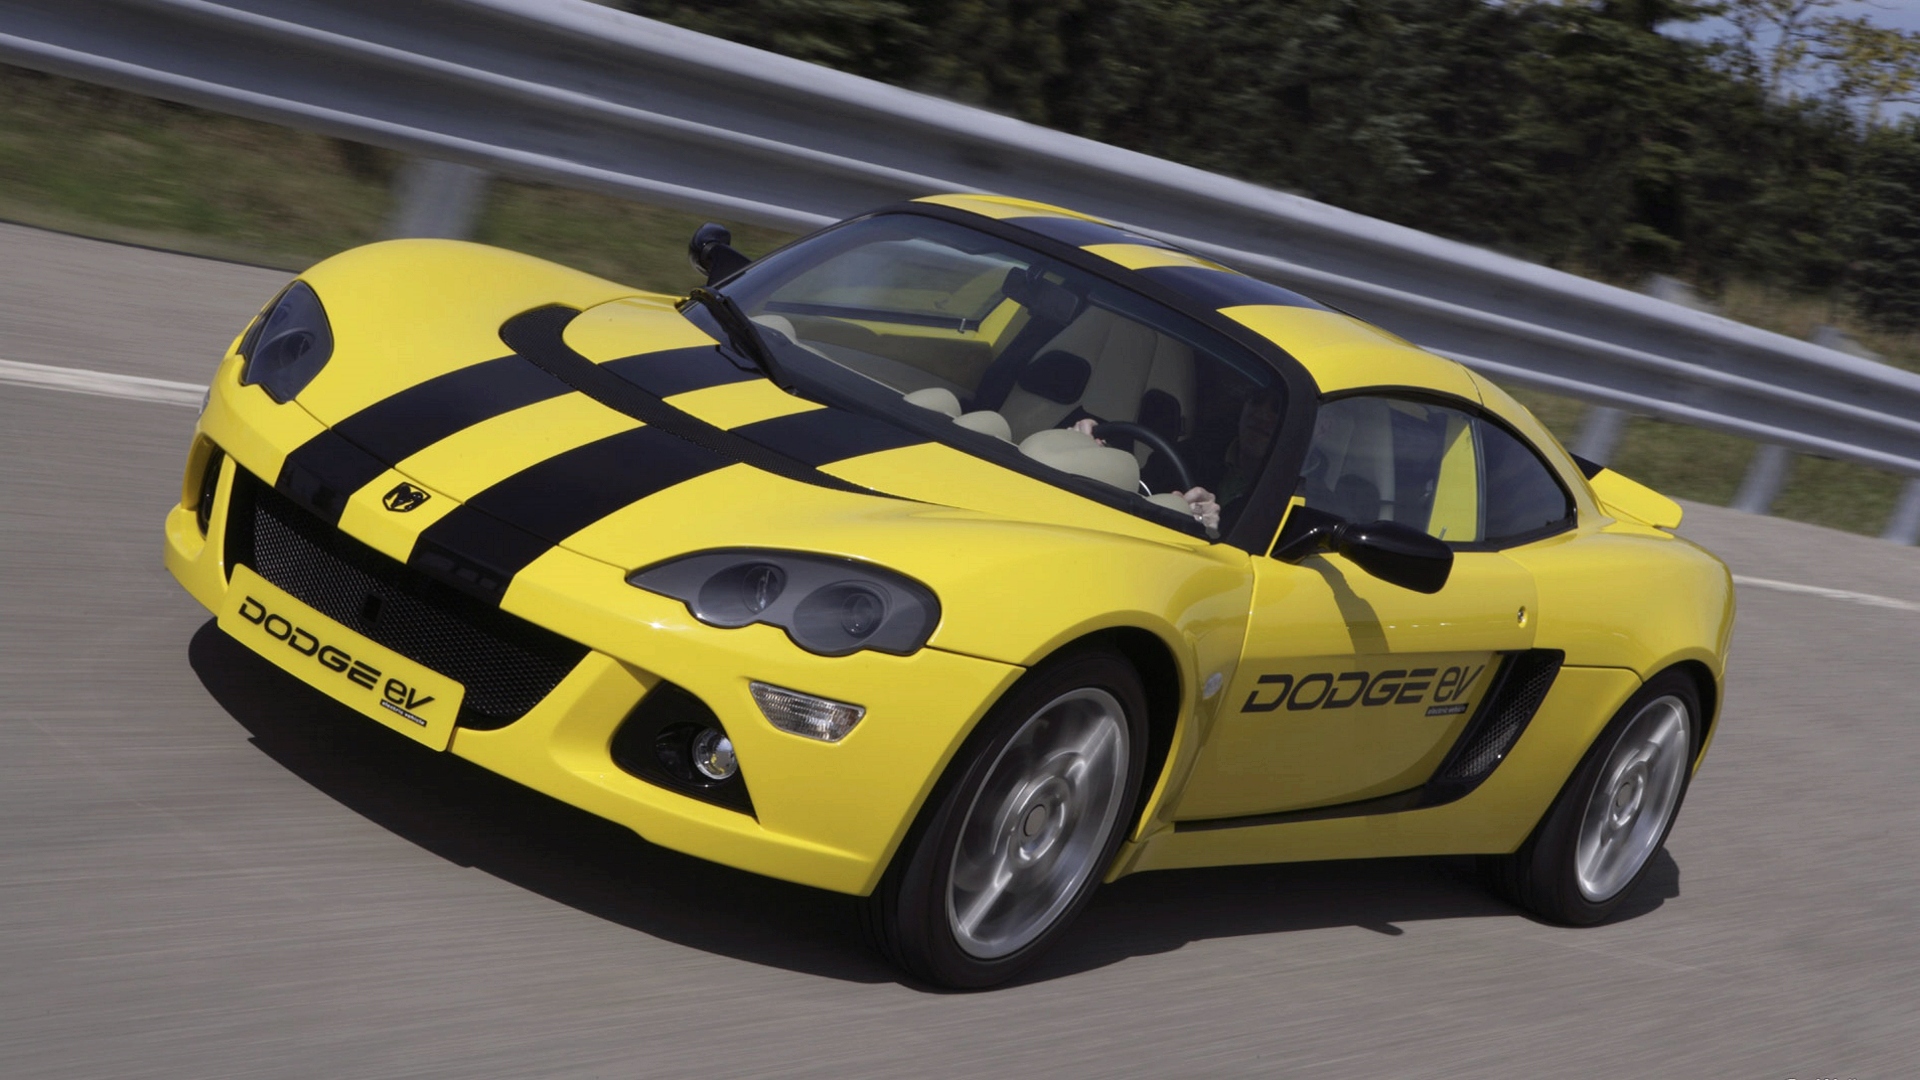 Wallpapers car Dodge yellow cars on the desktop